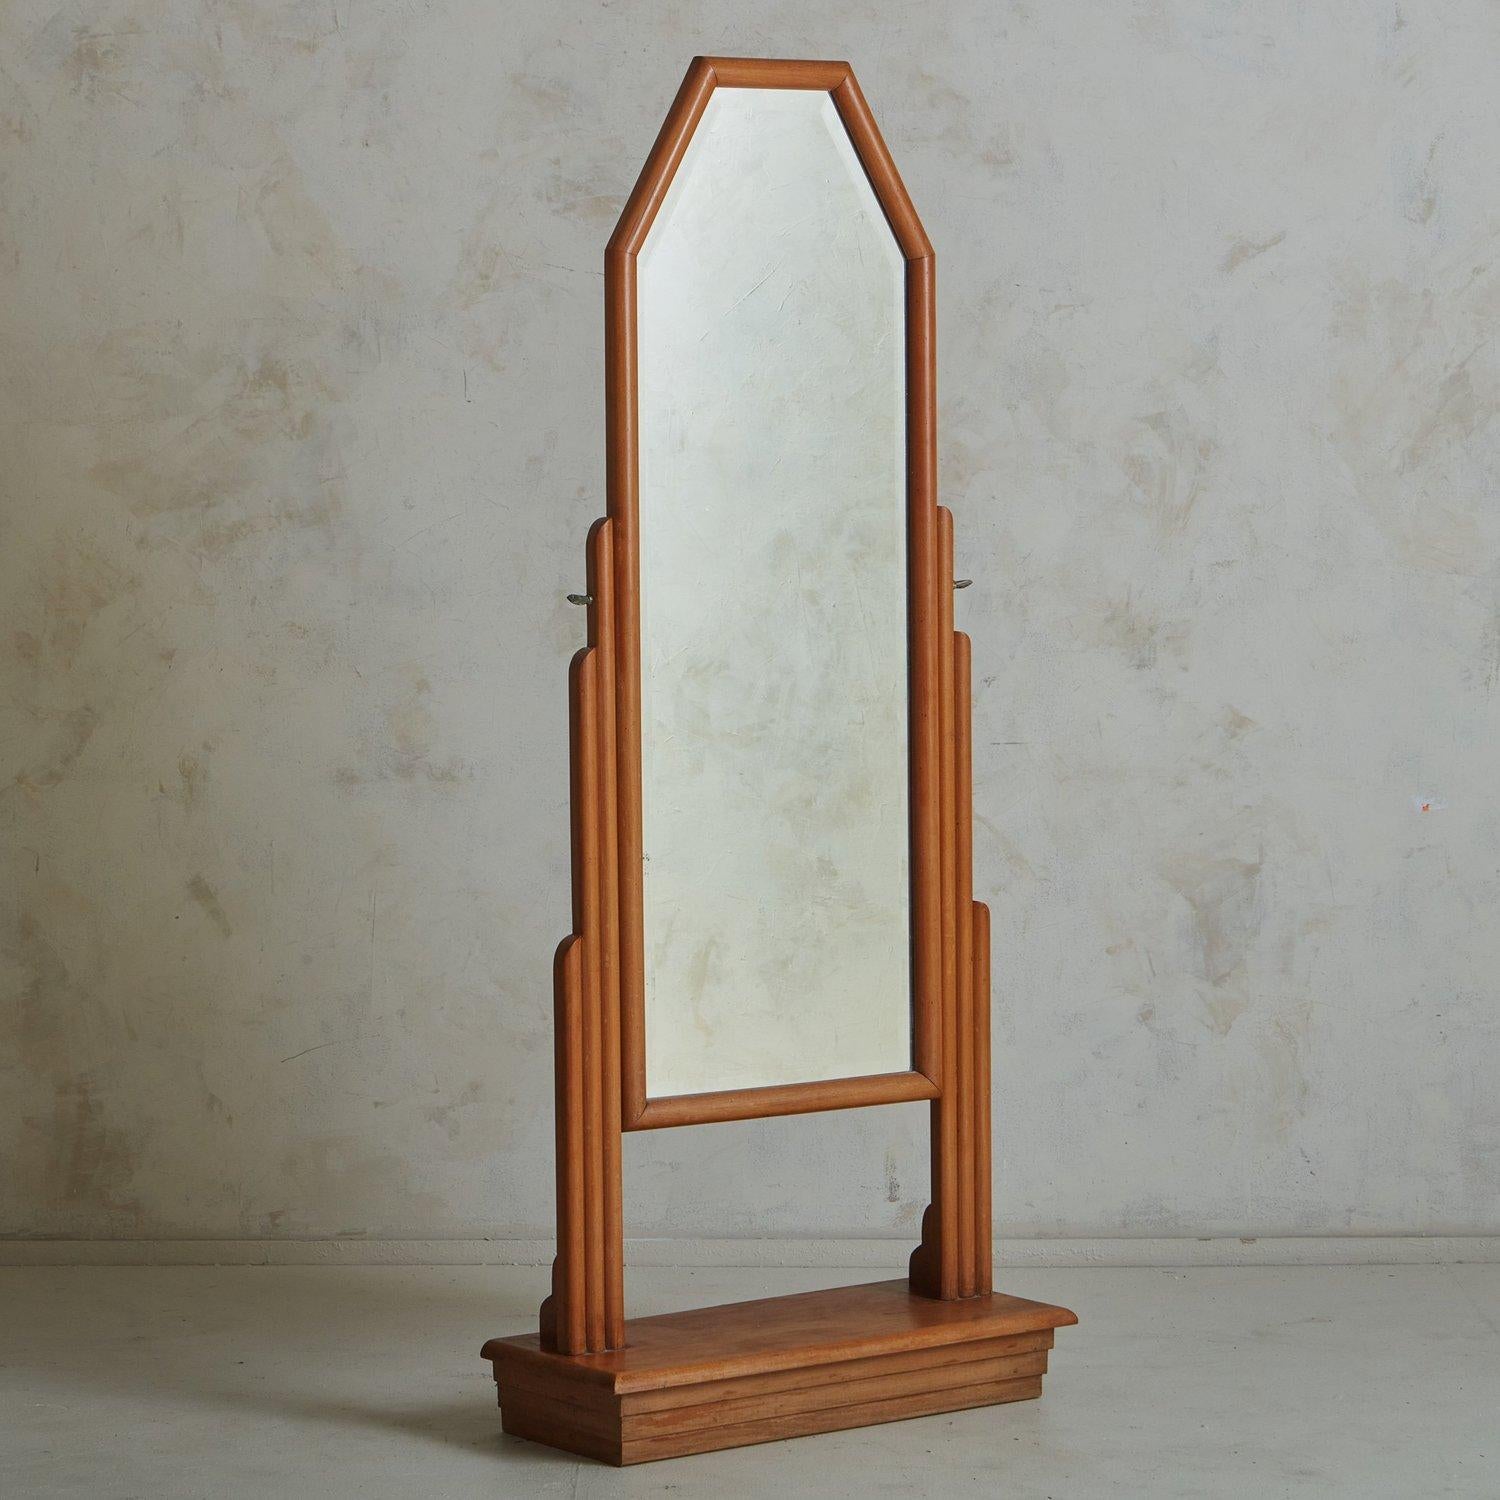 A 1930s French Art Deco style cheval mirror featuring an angular wood frame with cylindrical tiered detailing. This mirror has a rectangular undulated base and ornate metal hardware, which allows the position of the mirror to be adjusted. Unmarked.